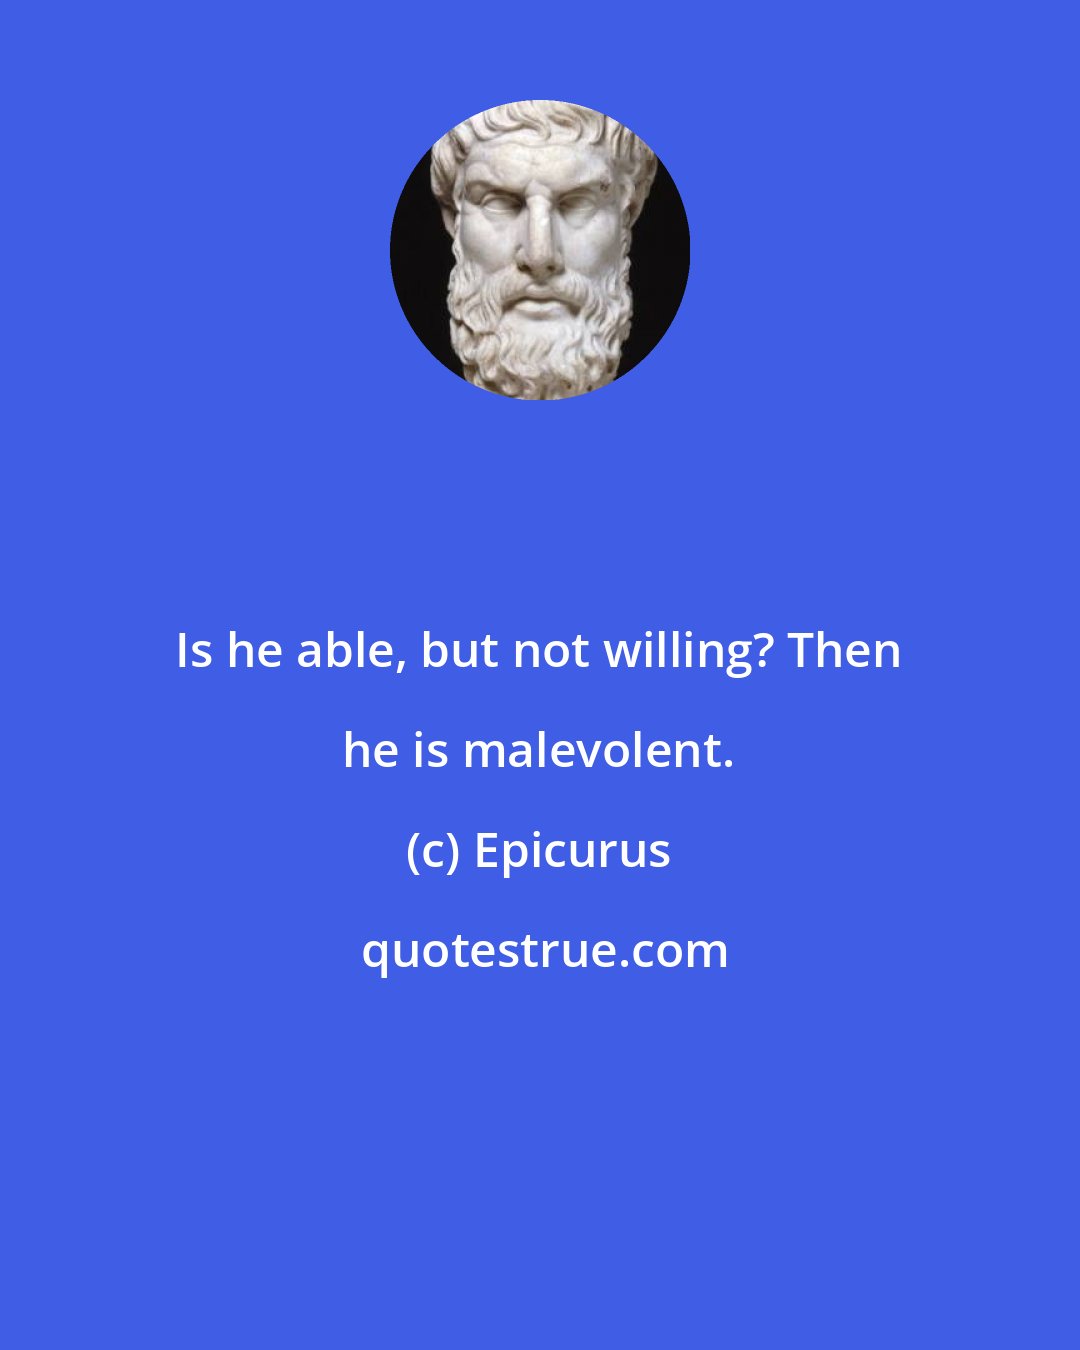 Epicurus: Is he able, but not willing? Then he is malevolent.